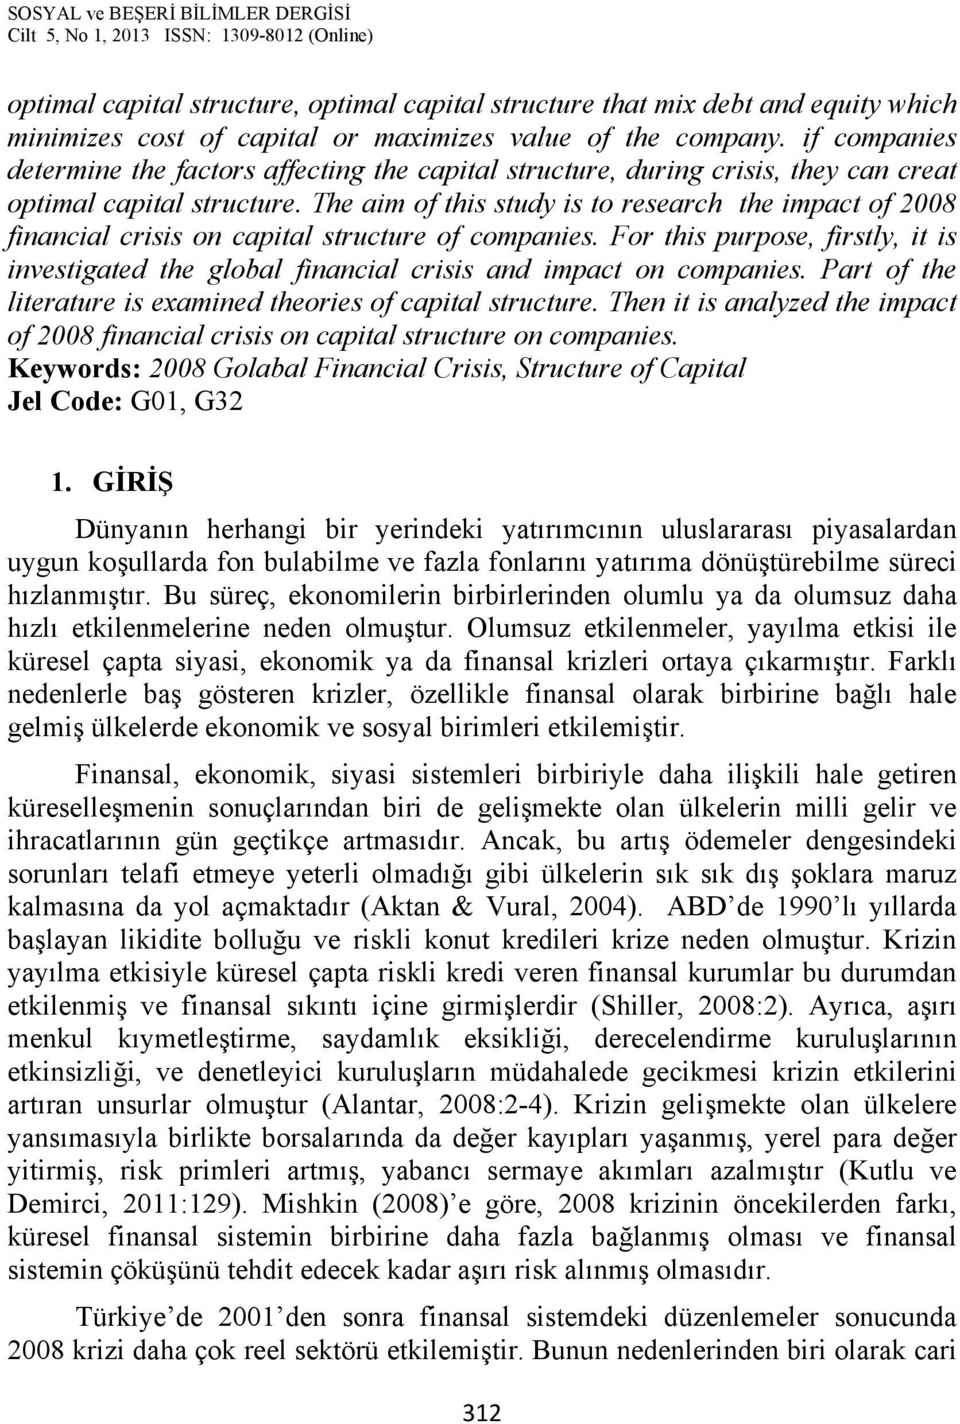 The aim of this study is to research the impact of 2008 financial crisis on capital structure of companies.